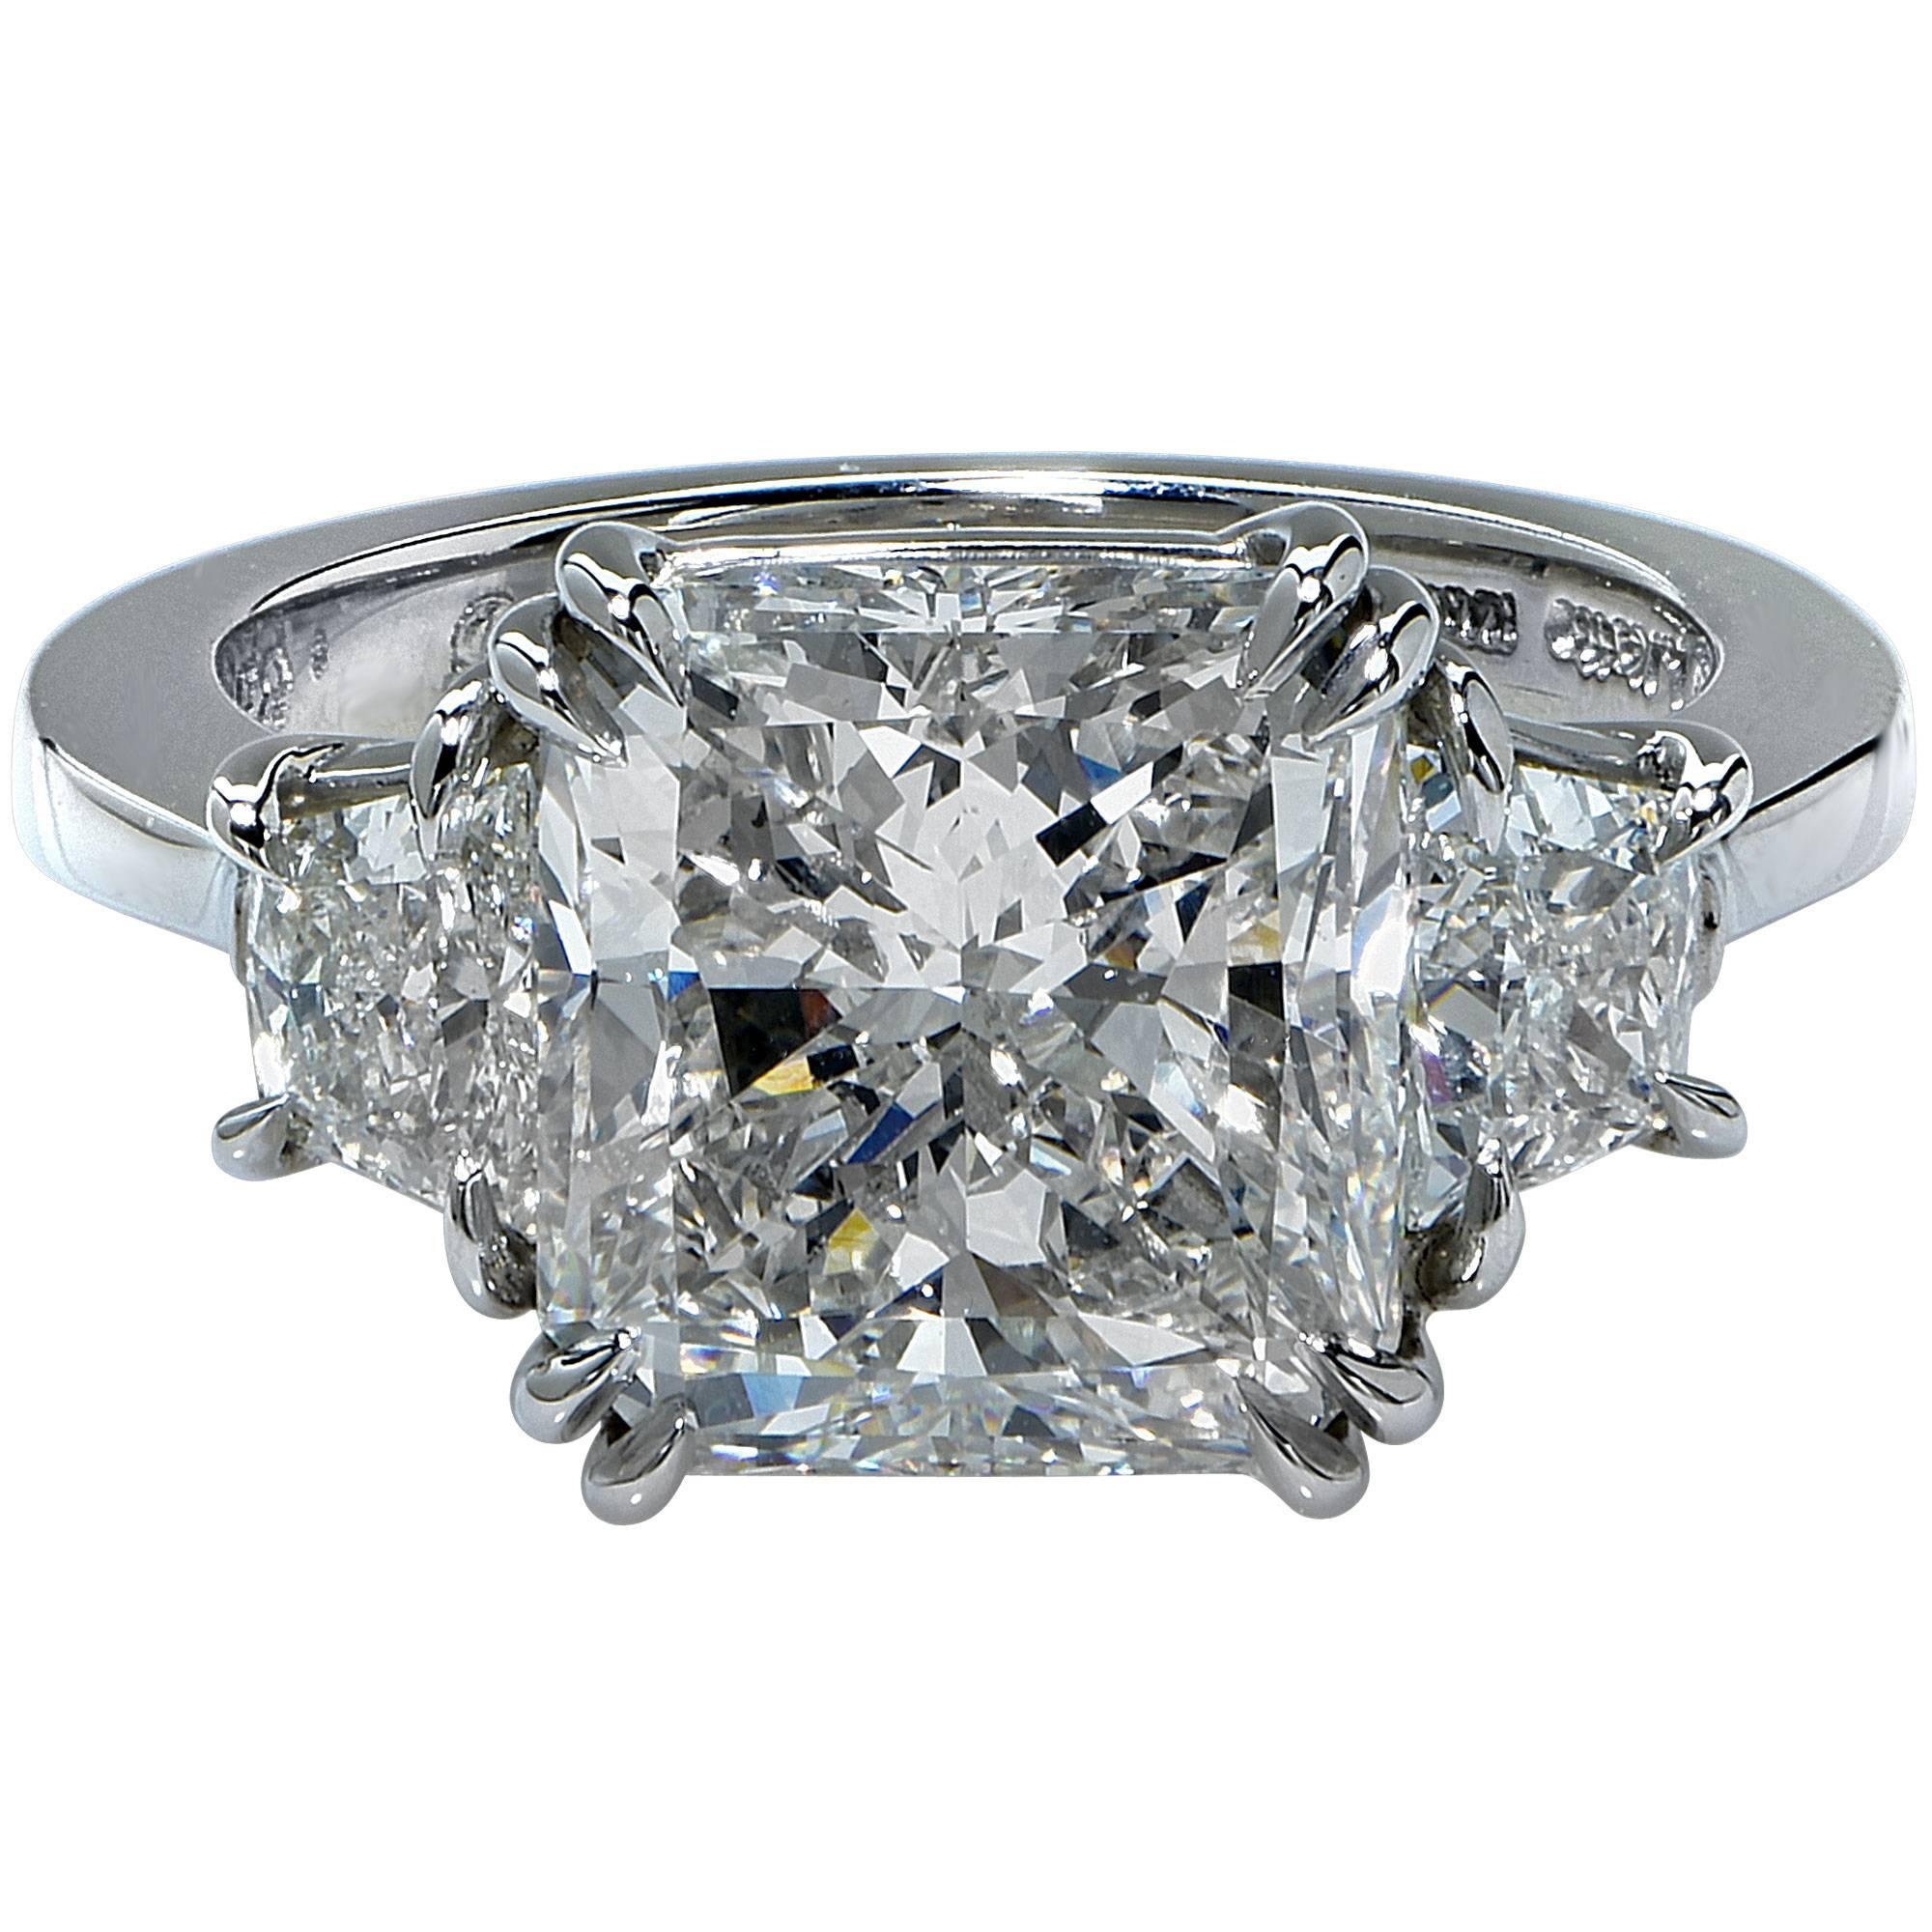 5.06ct J/VS2 clarity GIA radiant cut flanked by 2 trapezoids weighing .85cts, I color, VS clarity, set in a platinum hand made ring.

Ring size: 6.5 (can be re-sized up or down)

This diamond ring is accompanied by a GIA report as well as a retail